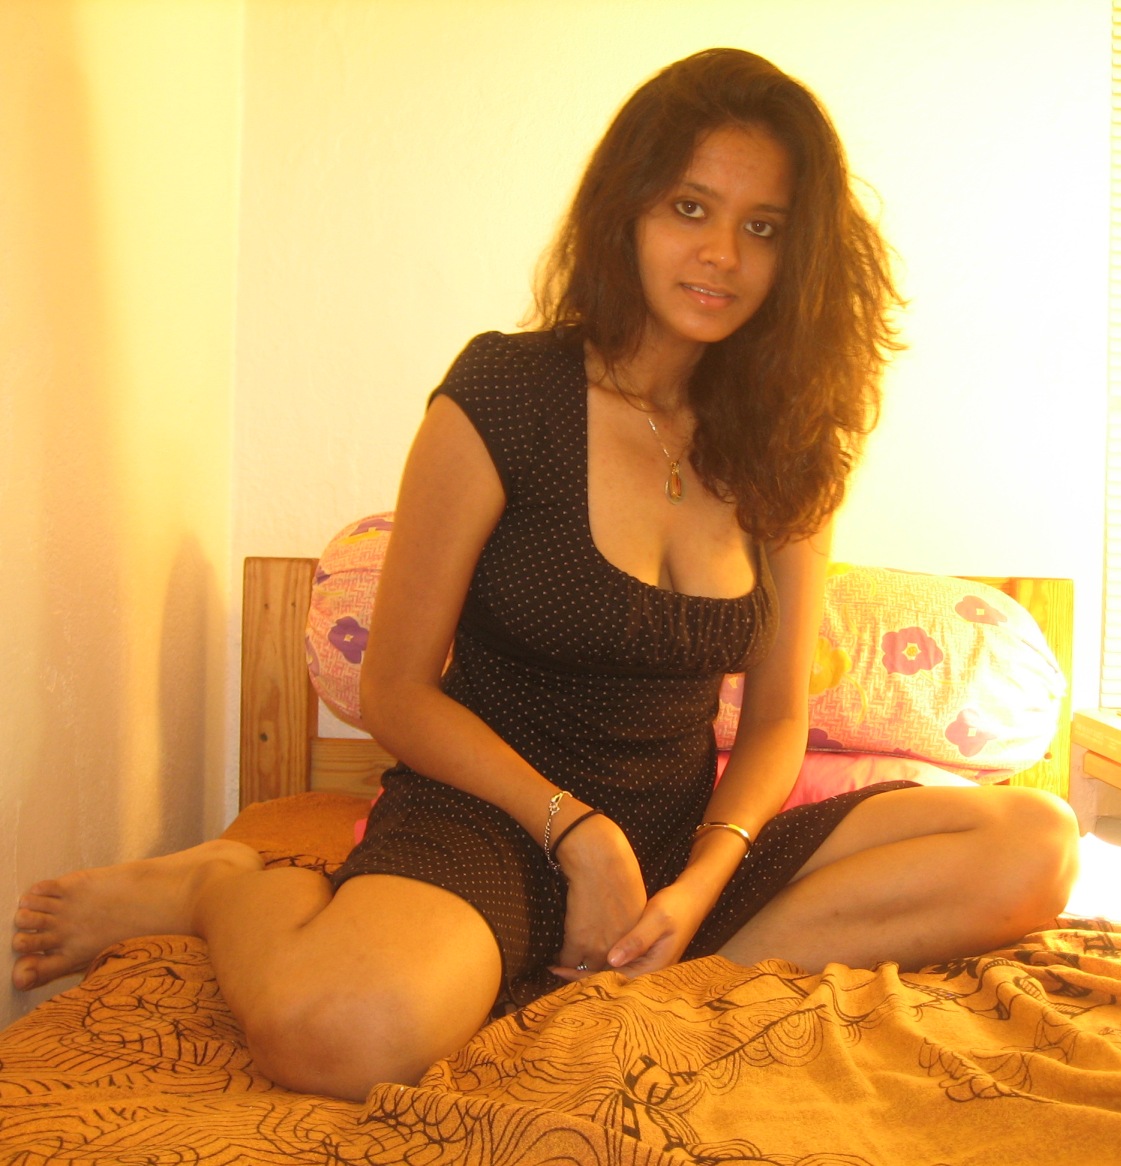 Very Hot Indian Girl Friend Showing Claveage In Photoshoot -2419